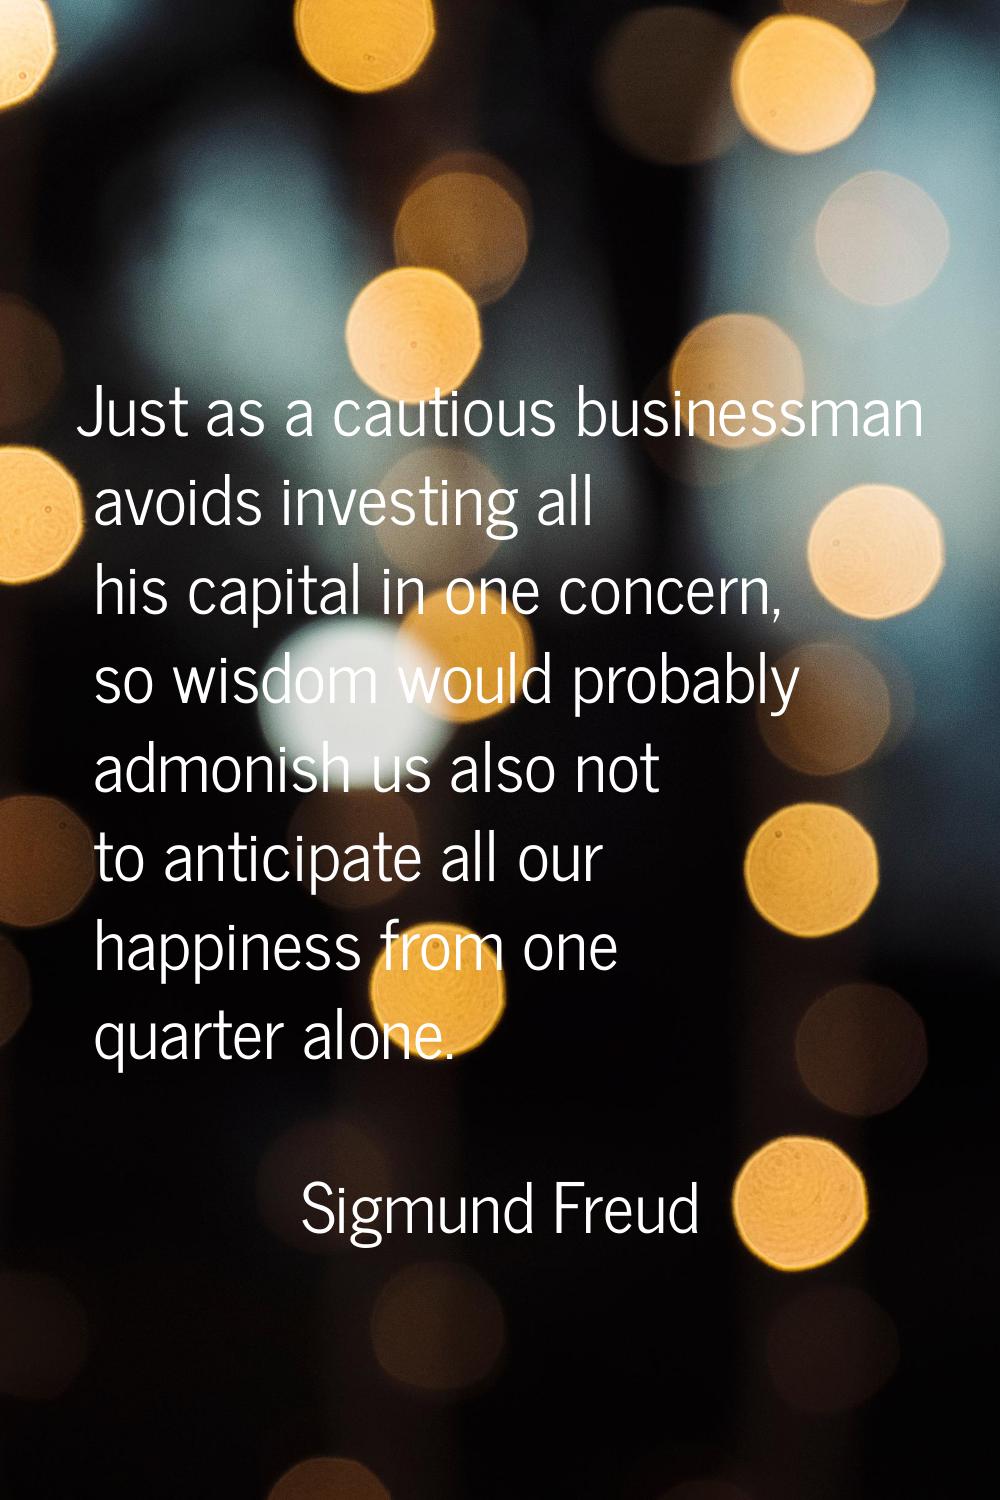 Just as a cautious businessman avoids investing all his capital in one concern, so wisdom would pro